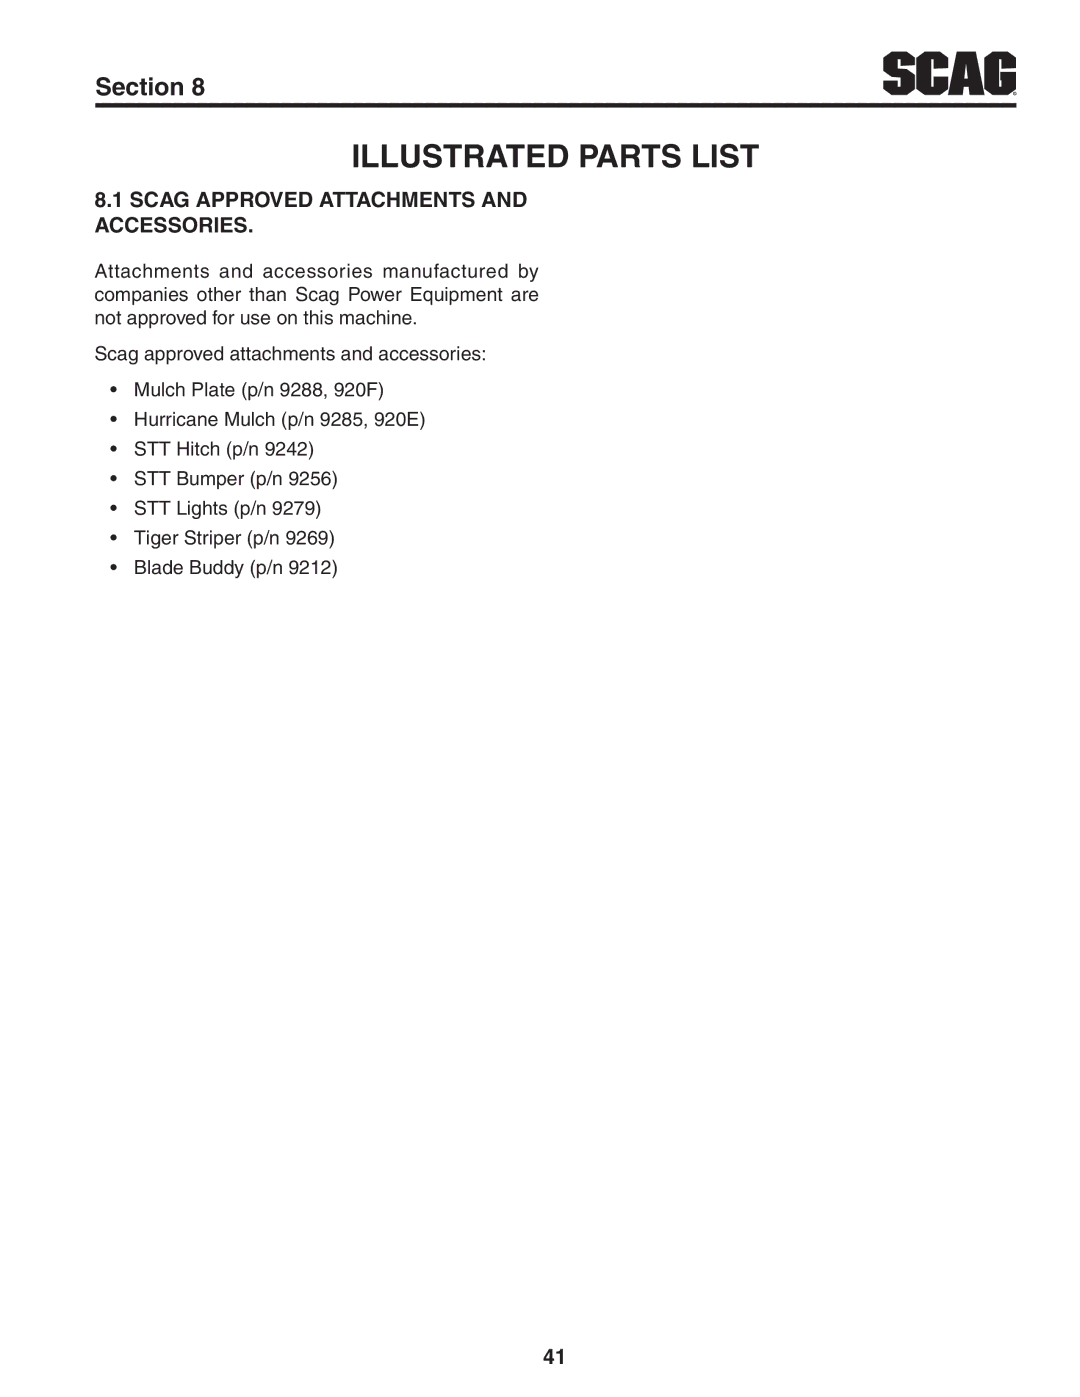 Scag Power Equipment STT61V-31KB-DF manual Illustrated Parts List, Scag Approved Attachments and Accessories 